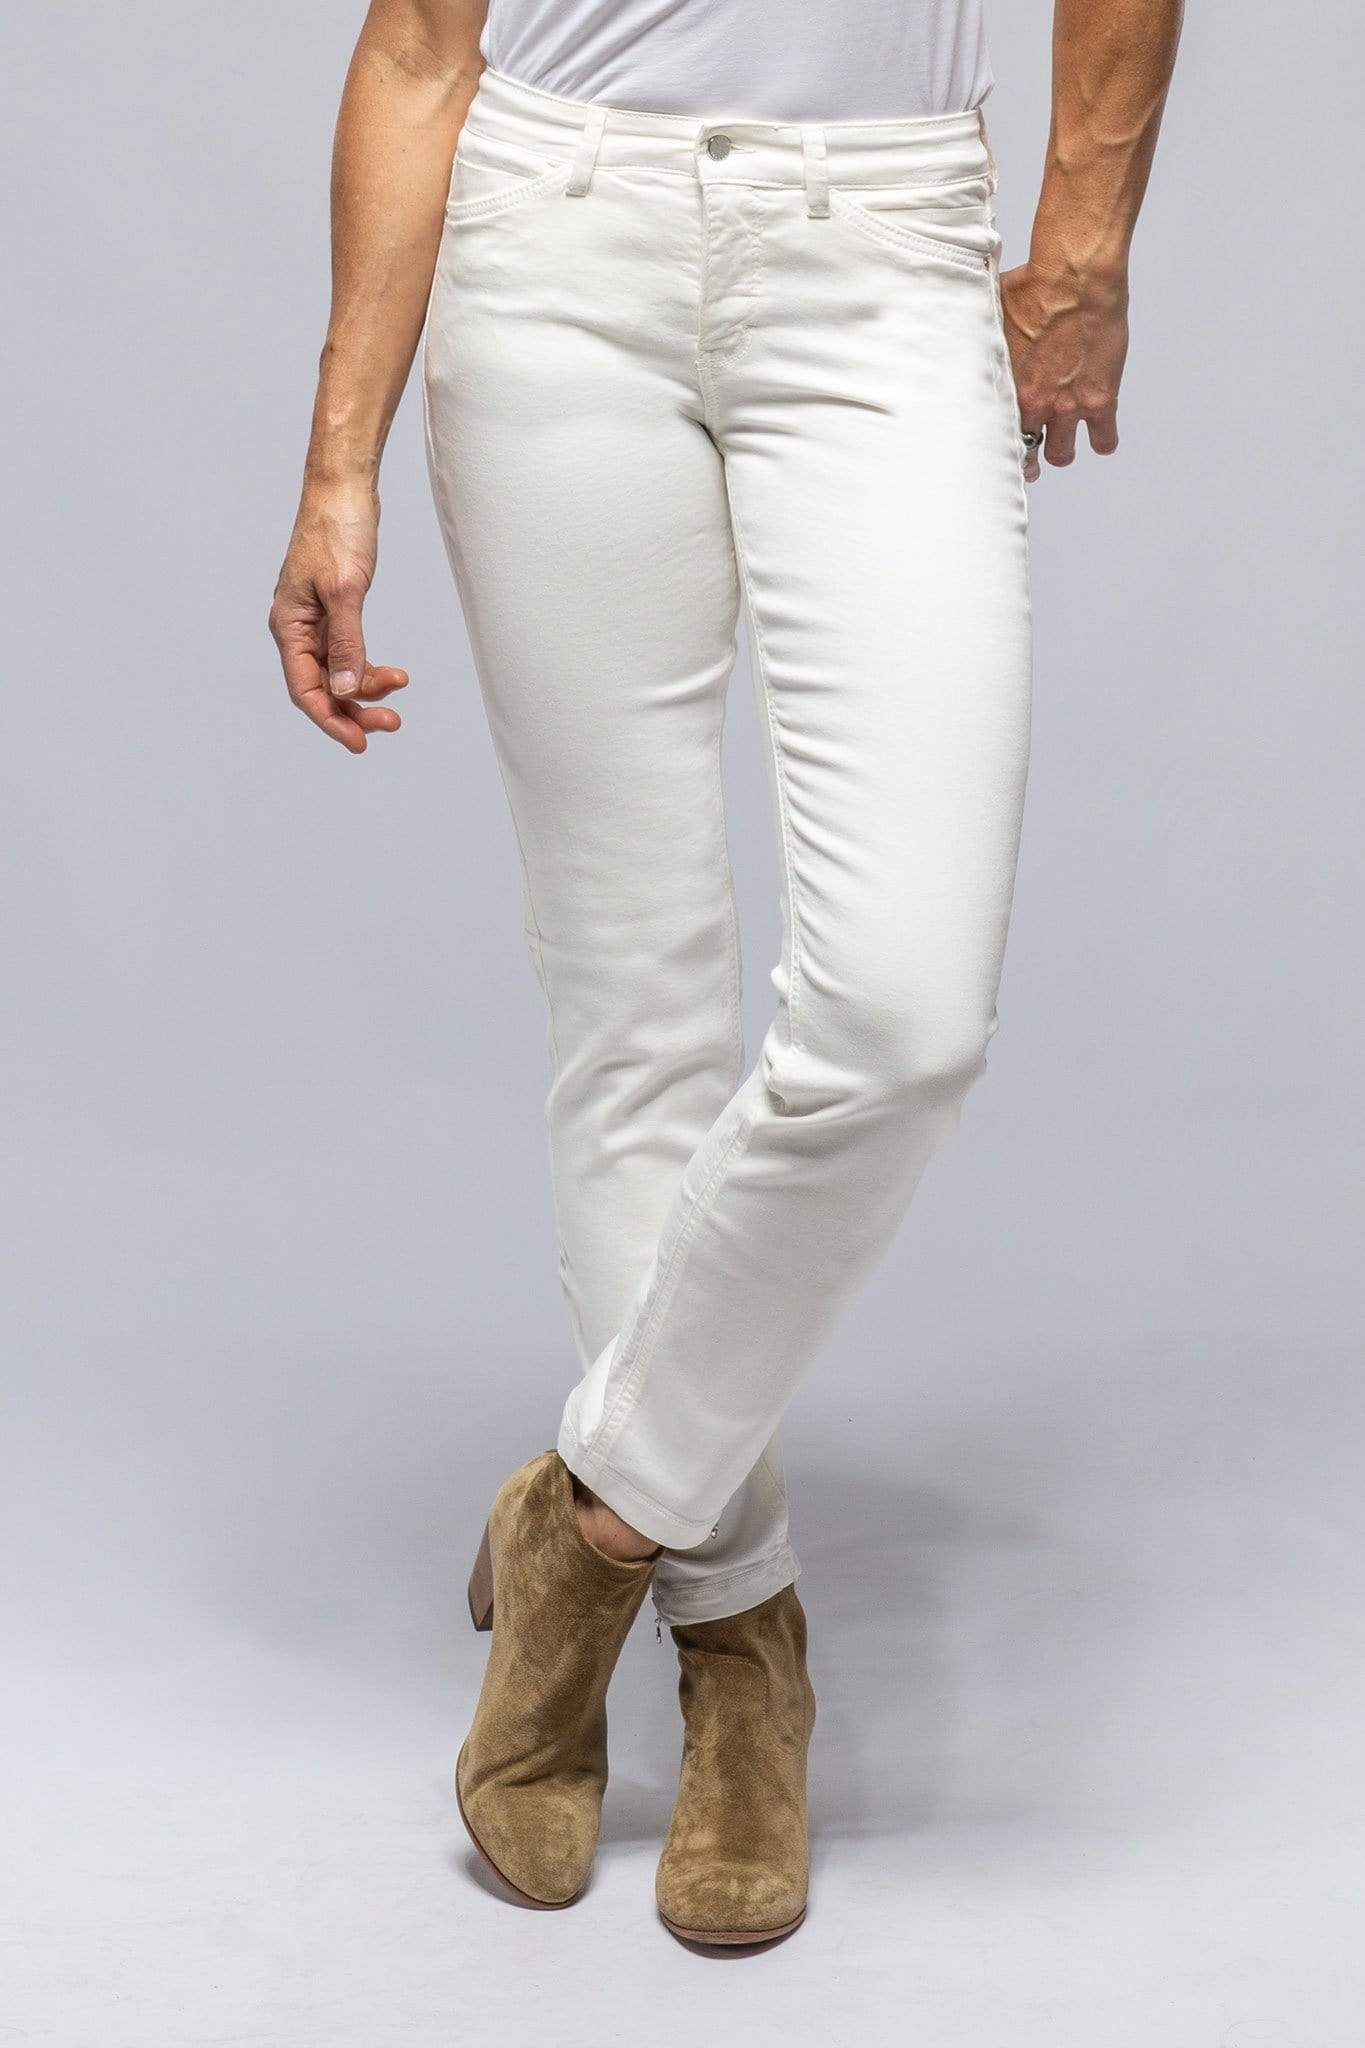 Jeans MAC Dream Chic in Off White | of Vail